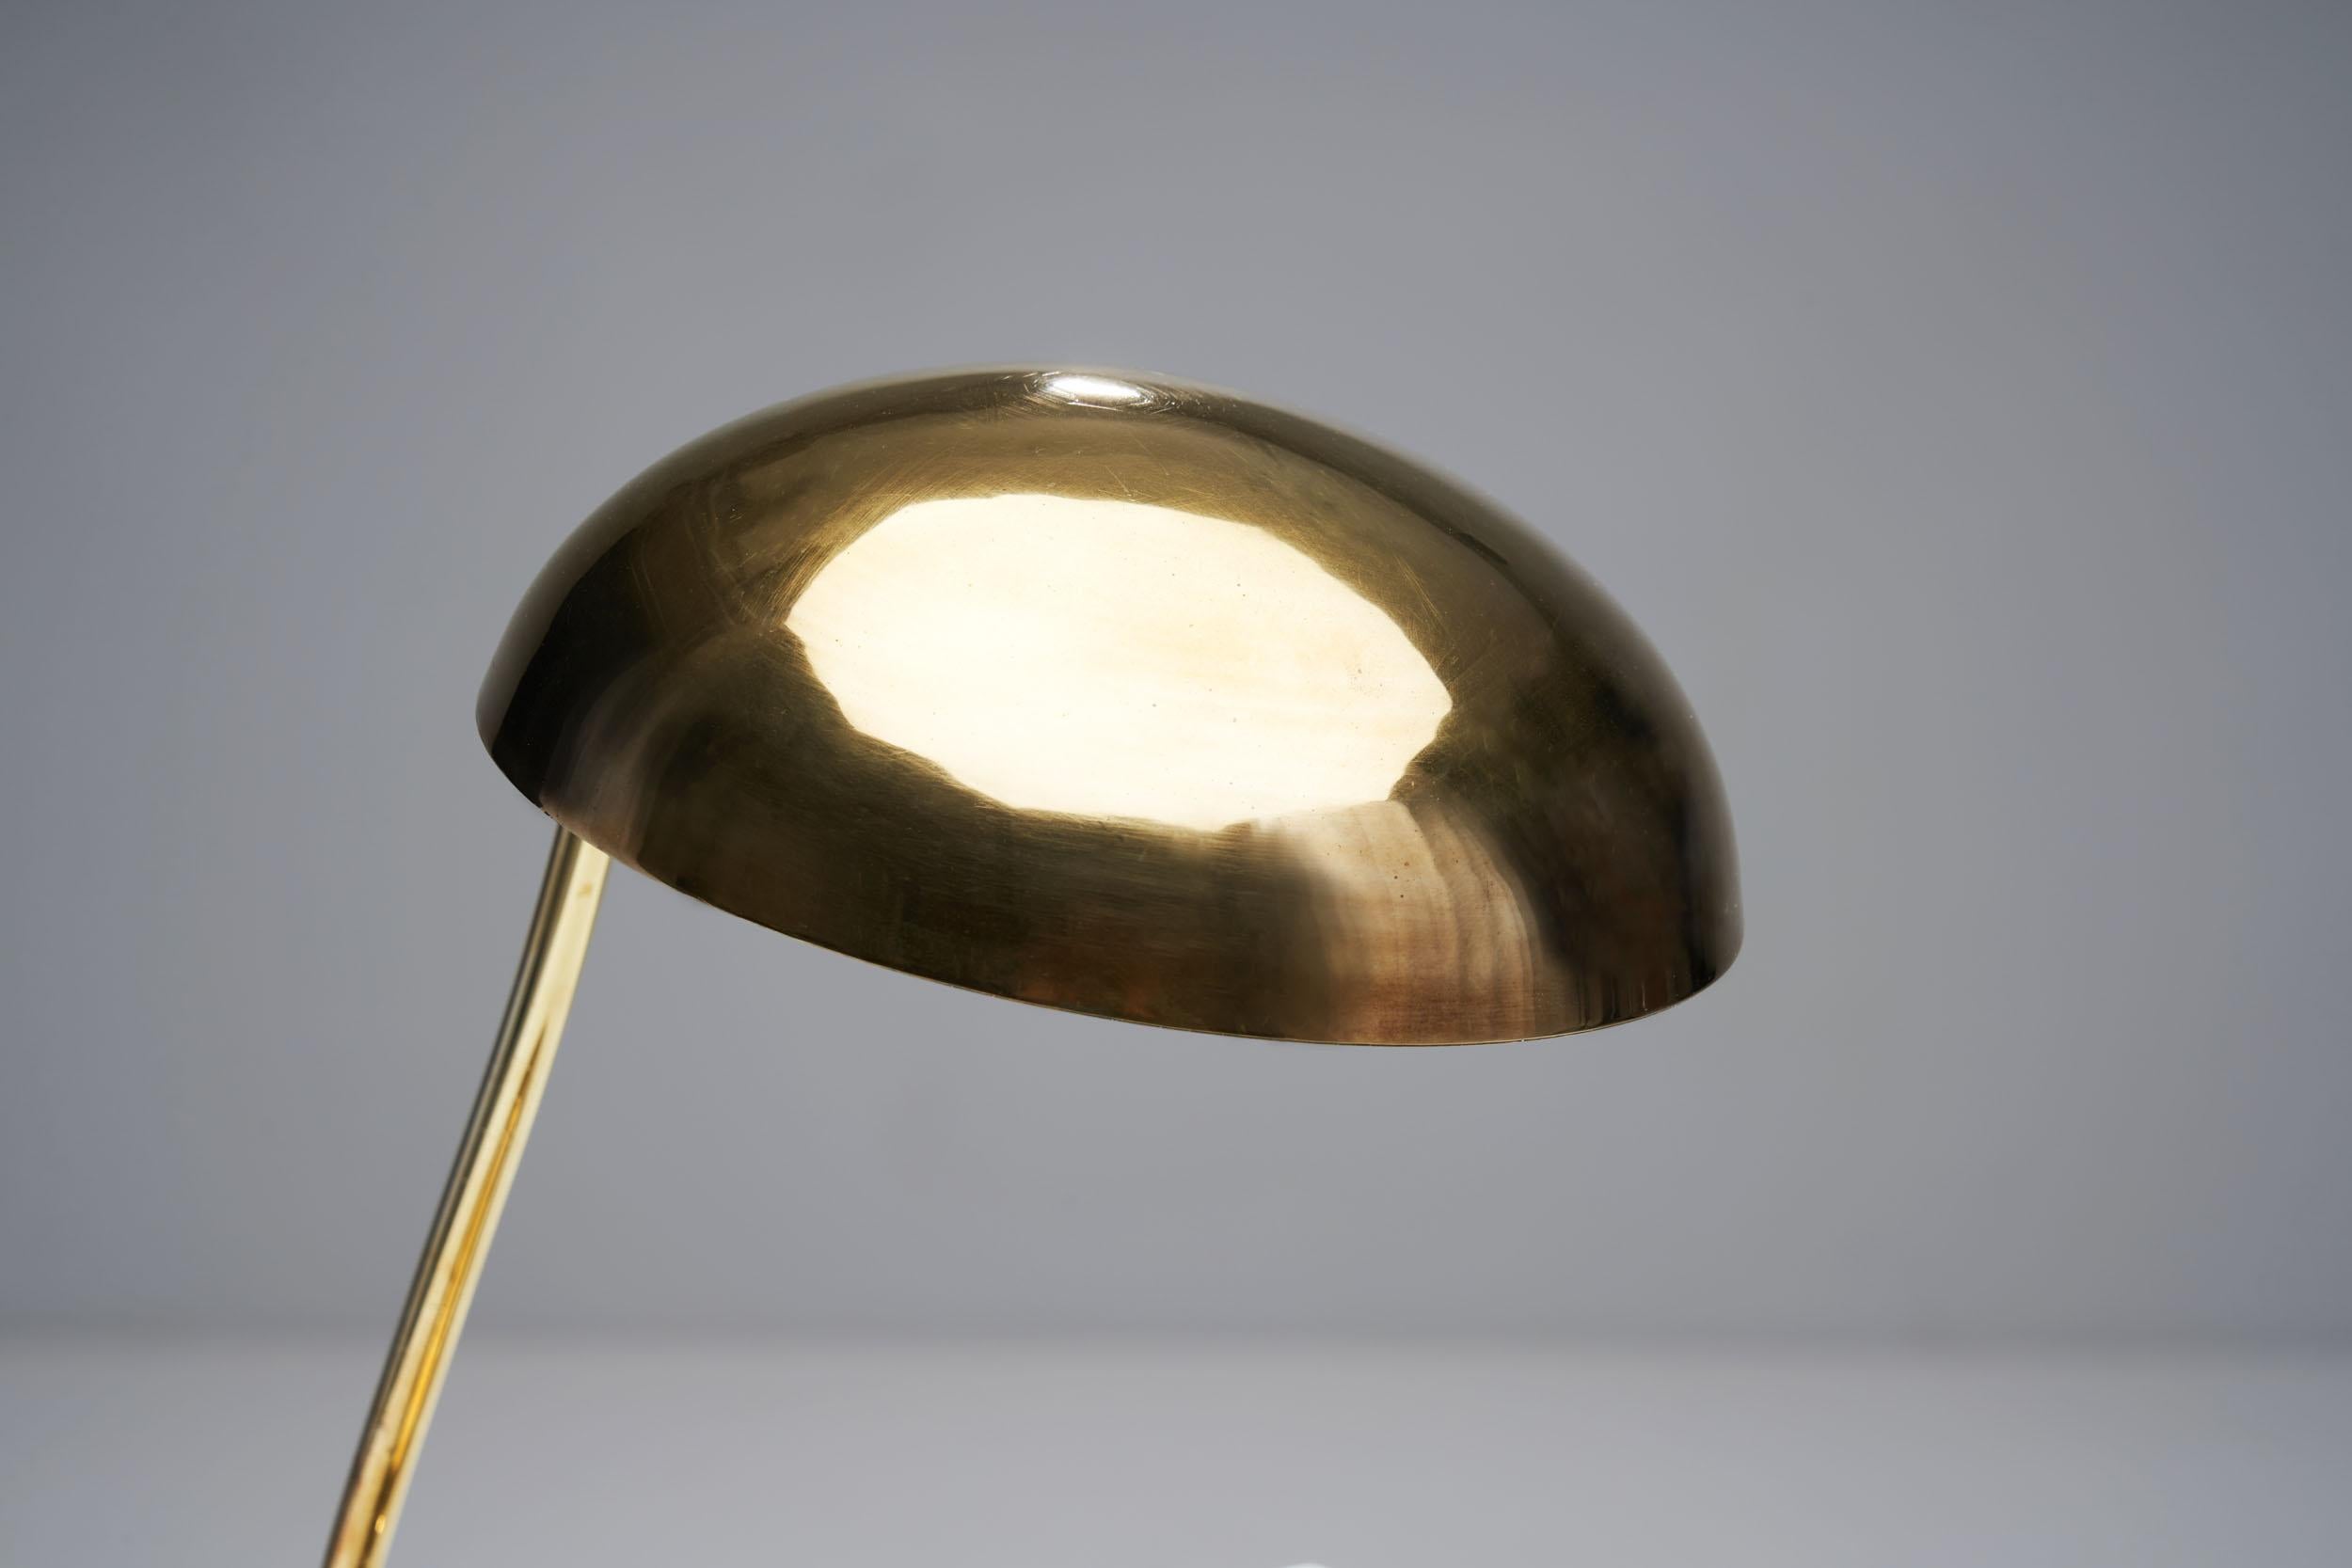 20th Century Mid-Century Model “2433” Brass Desk Lamp by Valinte Oy, Finland, 1950s For Sale